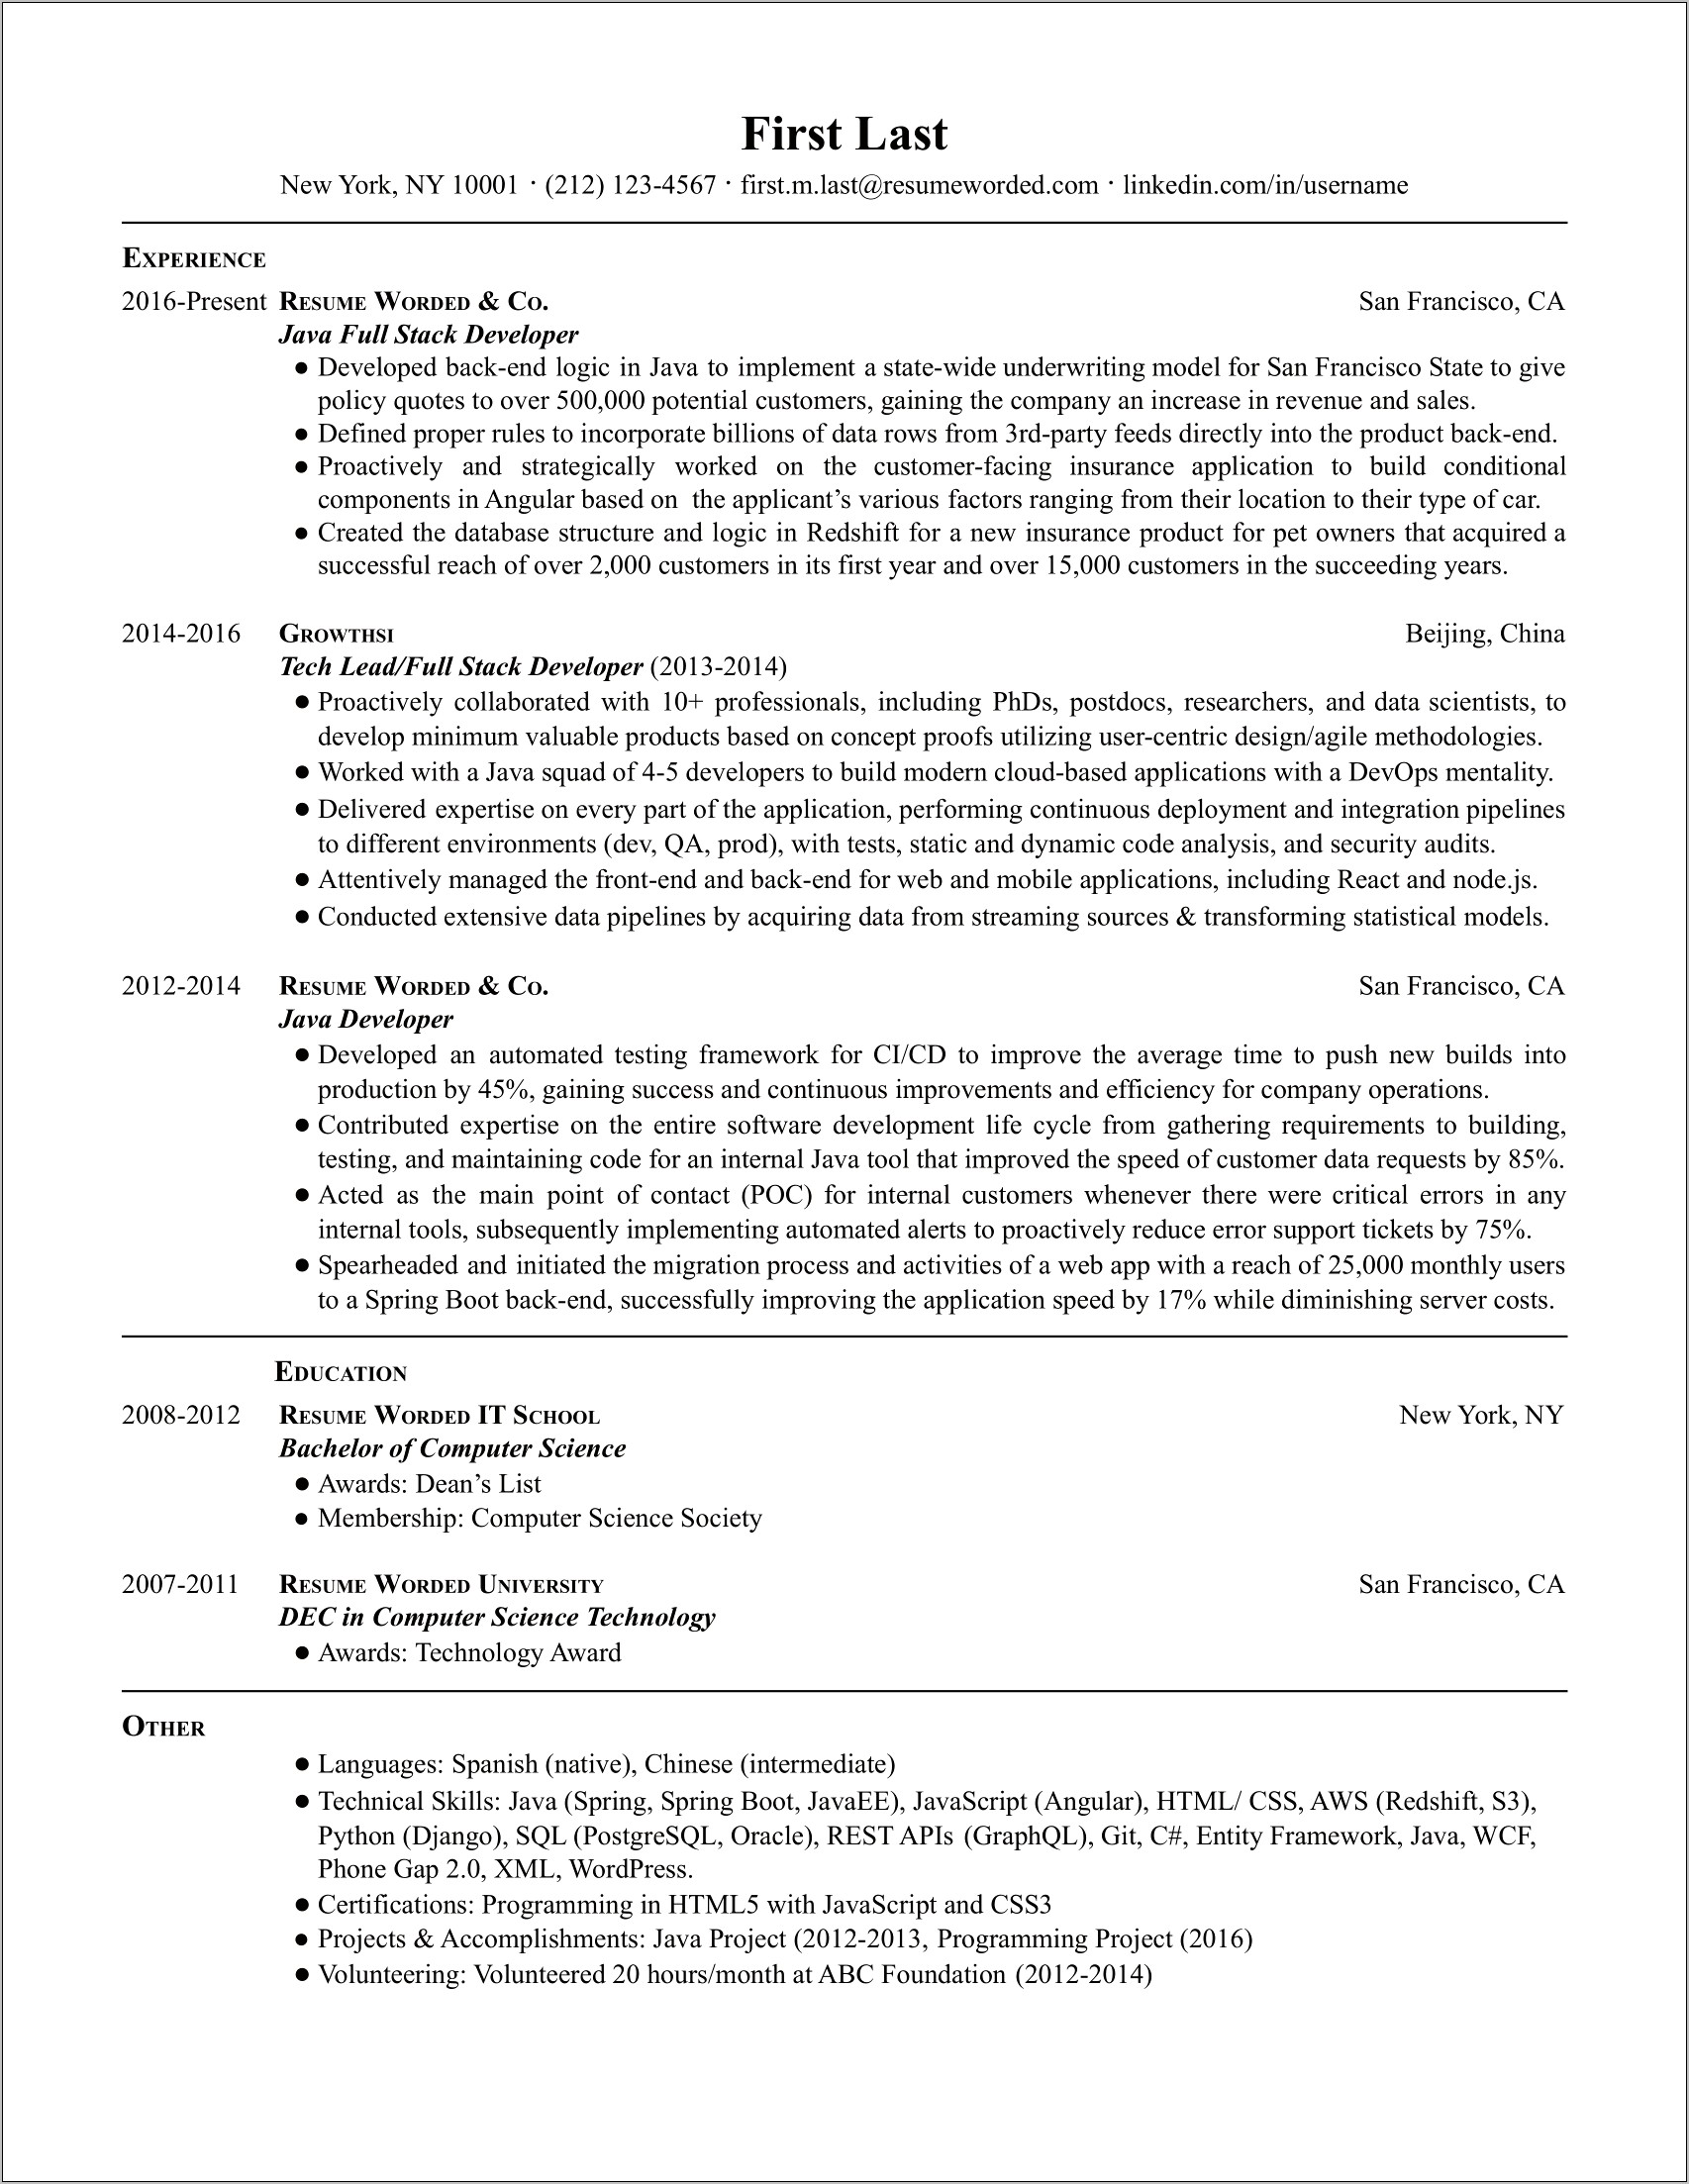 Java Developer With Fido Experience Resume